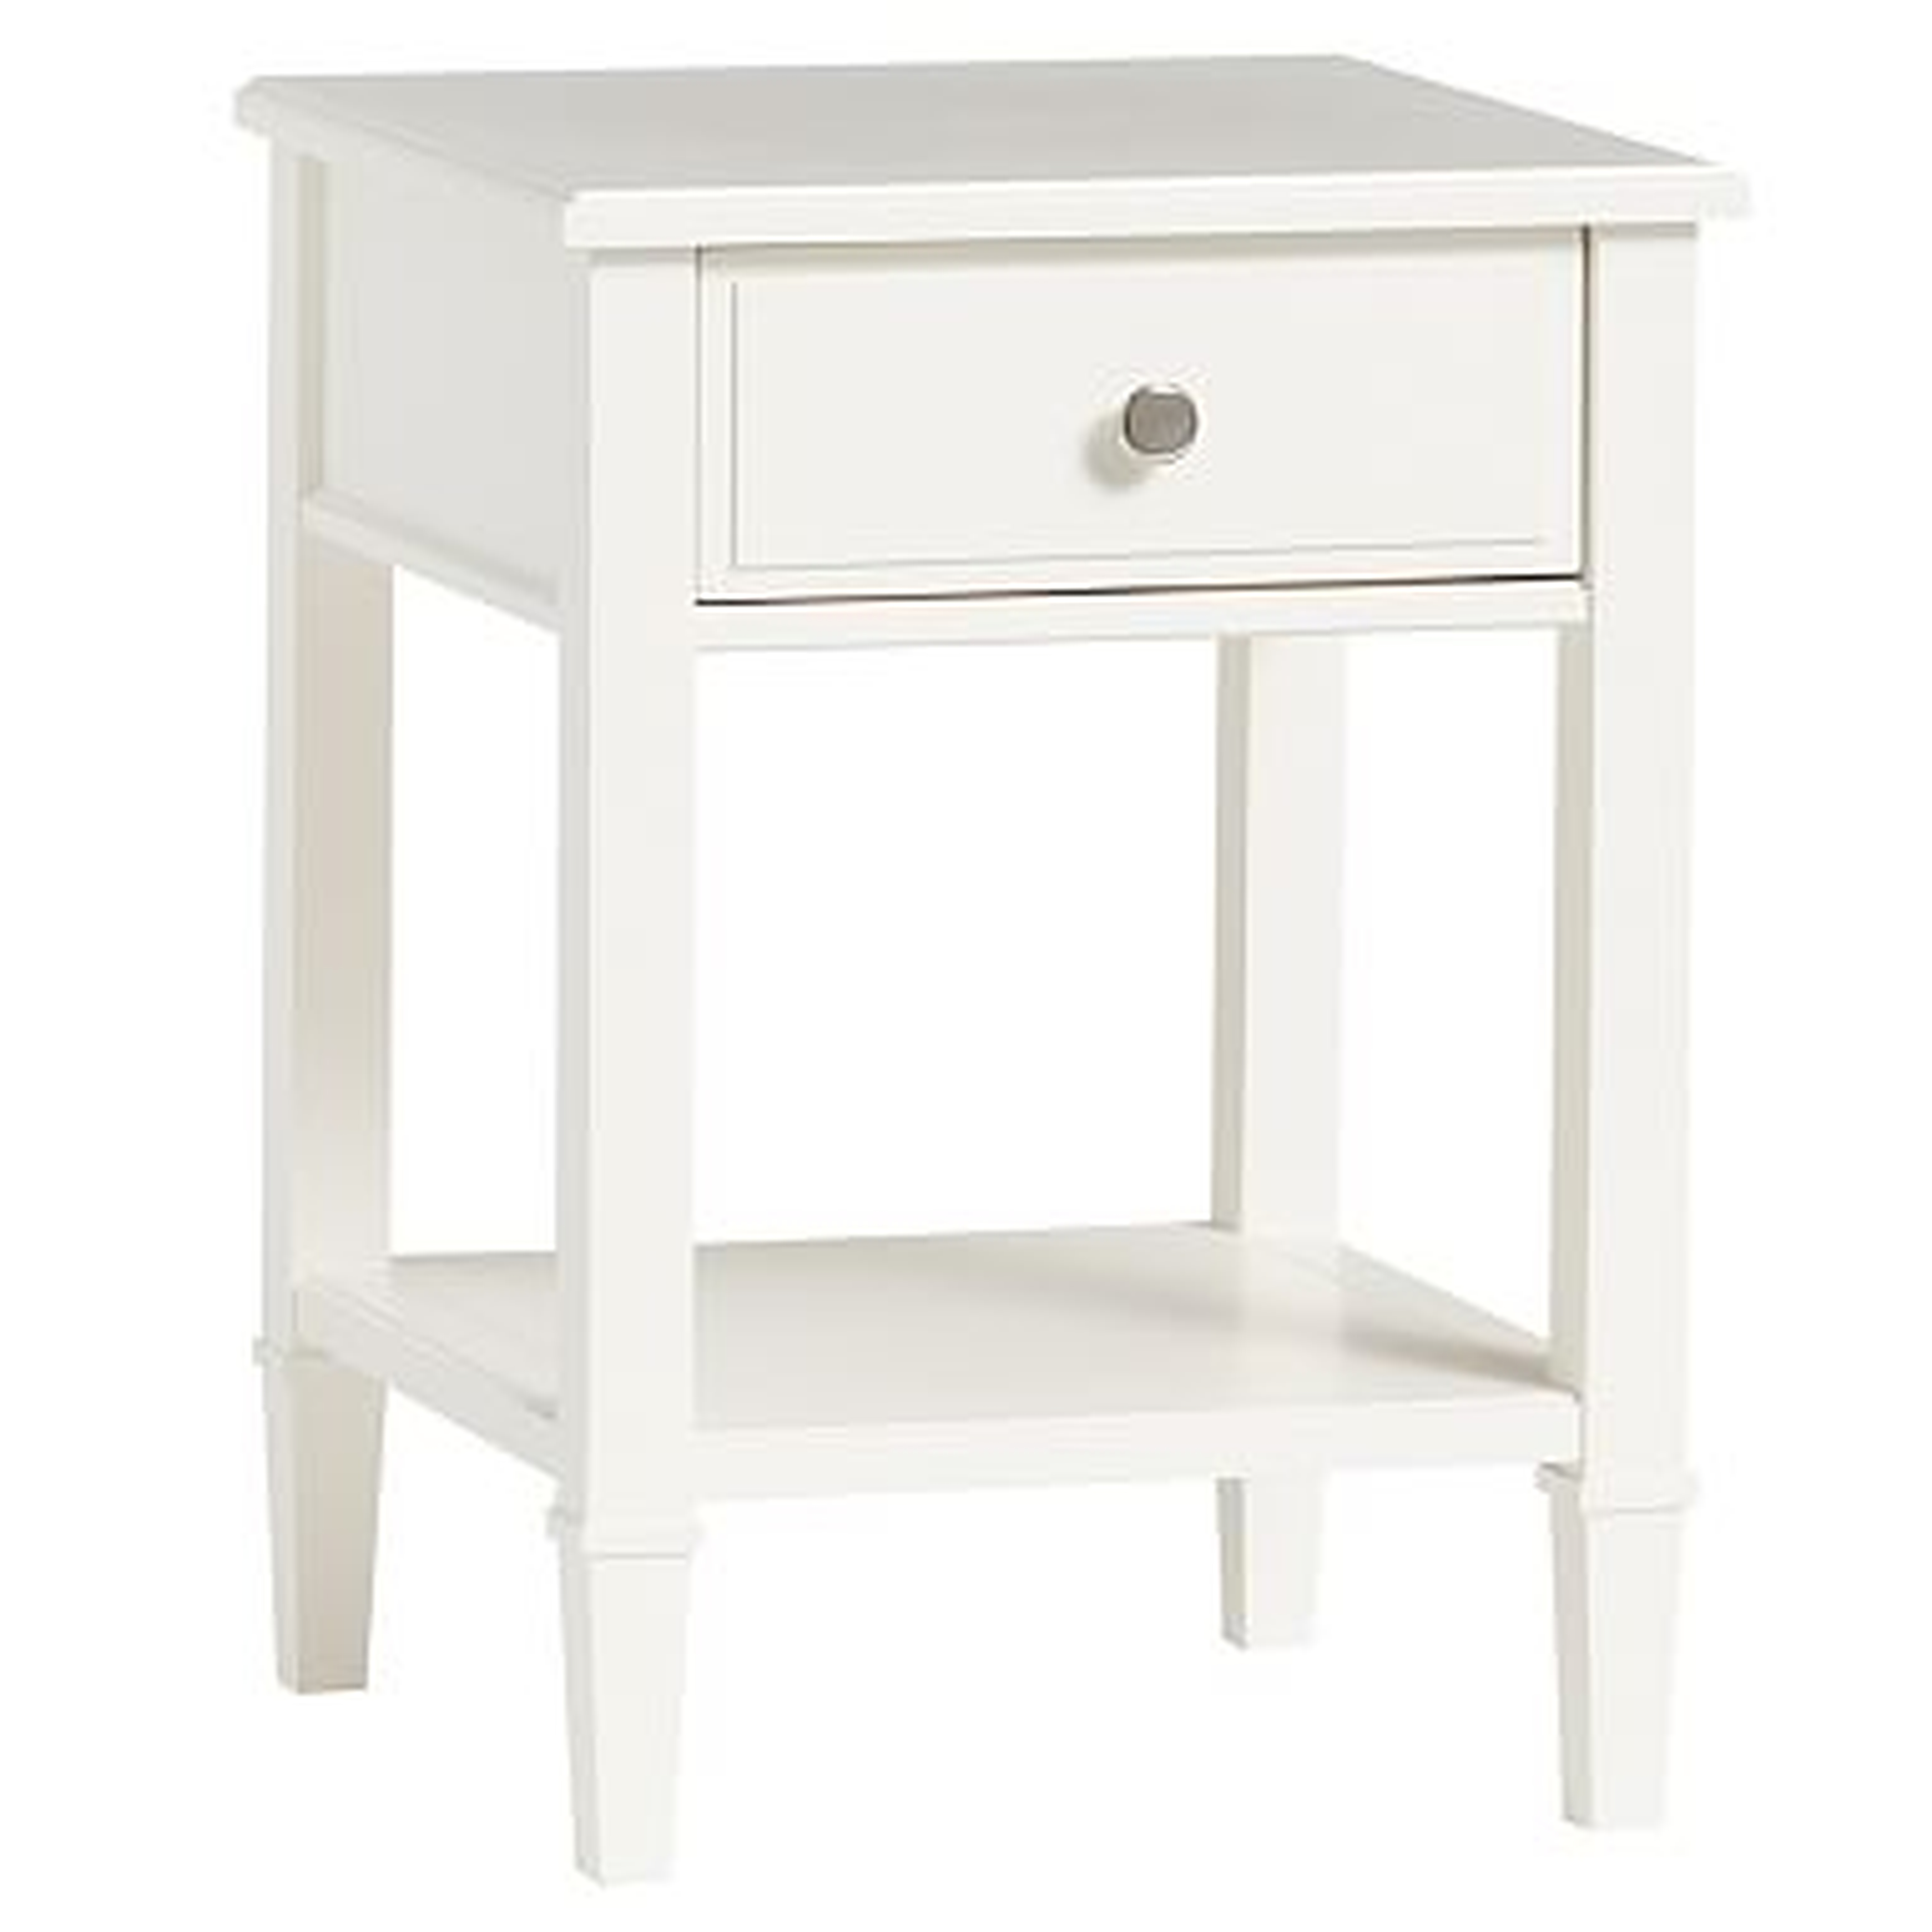 Fairfax Bedside Table, Water-Based Simply White - Pottery Barn Teen